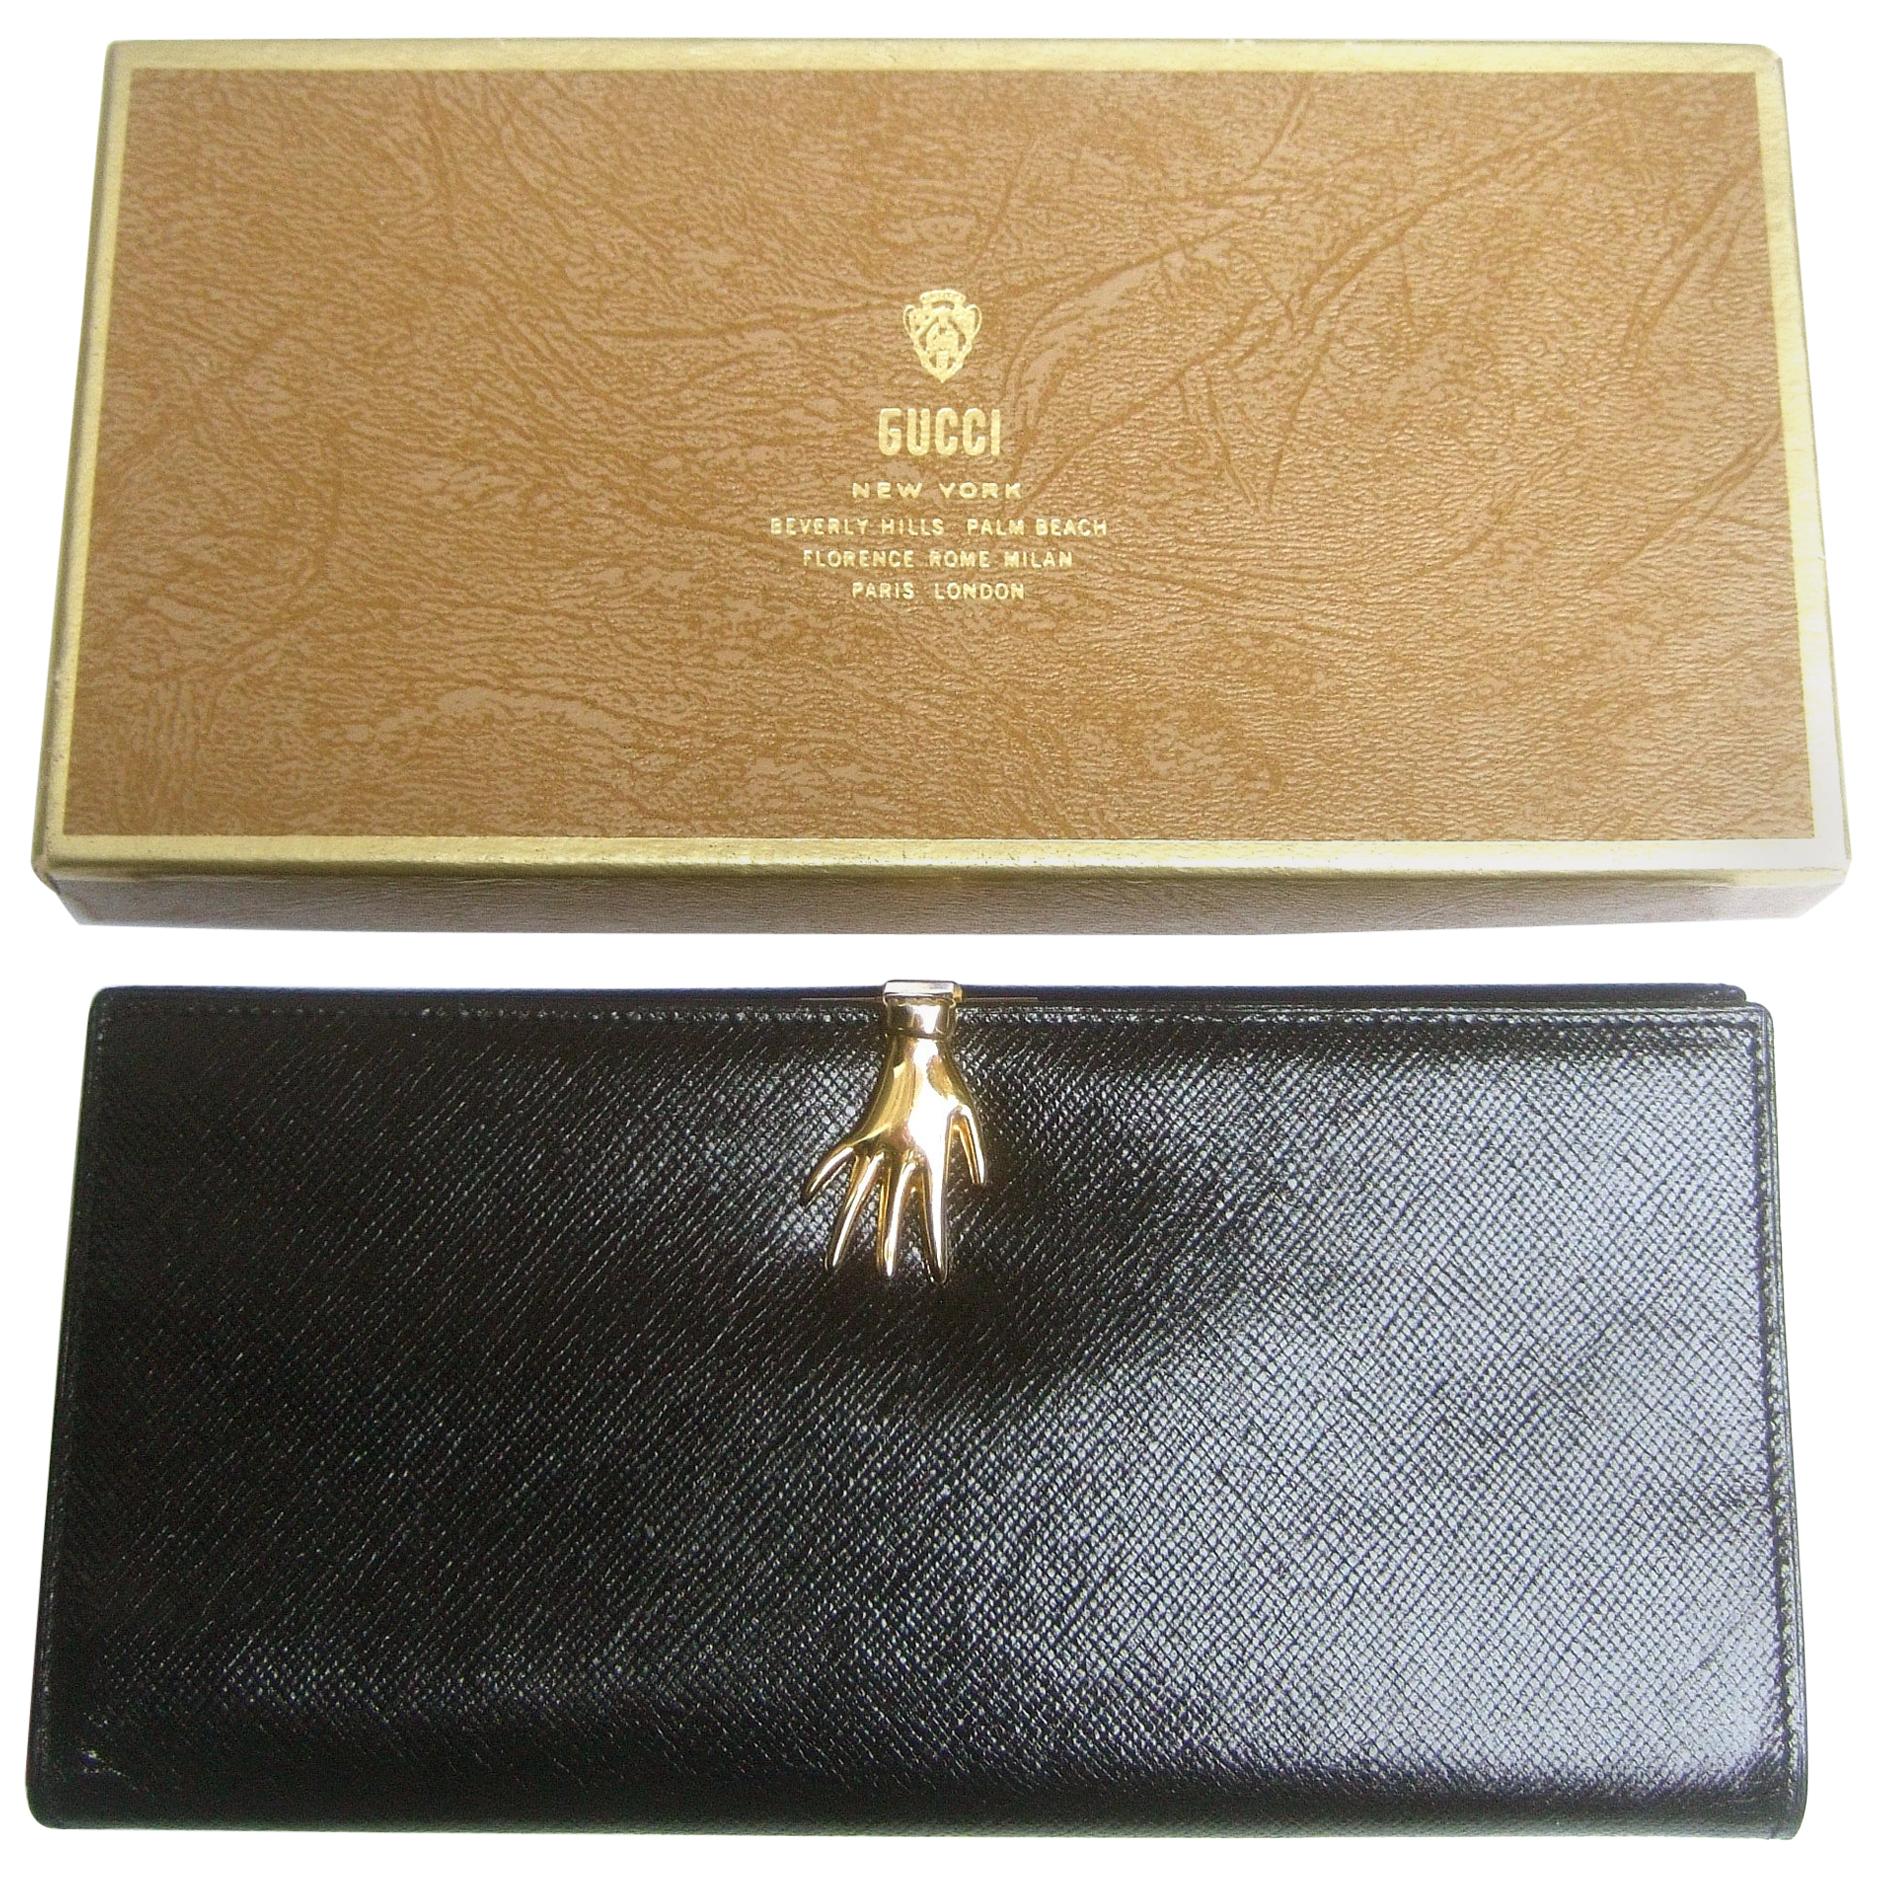 Gucci Italy Ebony Black Leather Hand Clasp Wallet in Presentation Box c 1970s